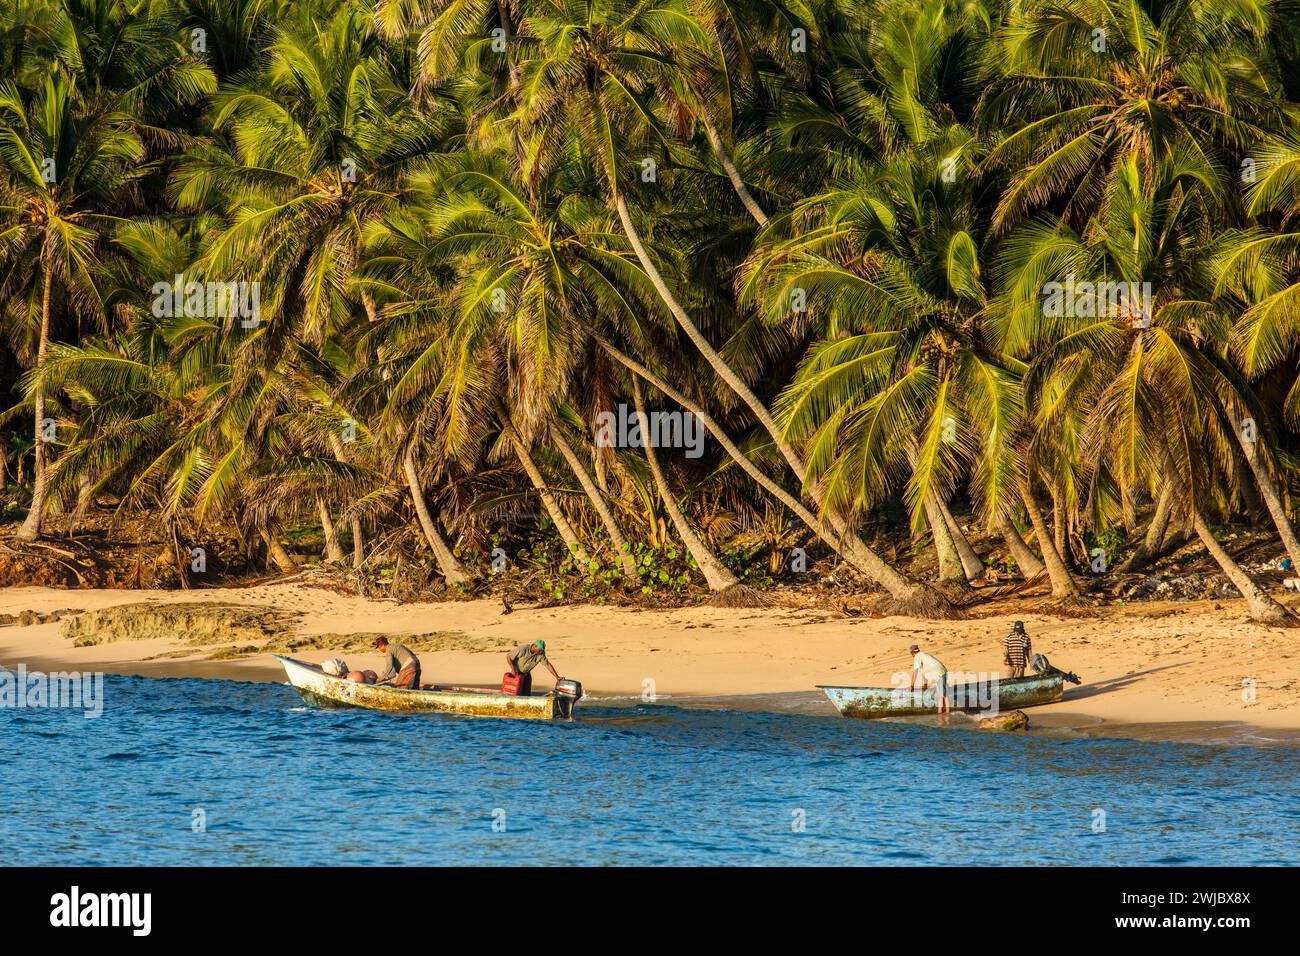 Four fishermen prepare to launch their boats in the early morning in the Bay of Samana, near Samana, Dominican Republic.  Palm trees line the shore. Stock Photo